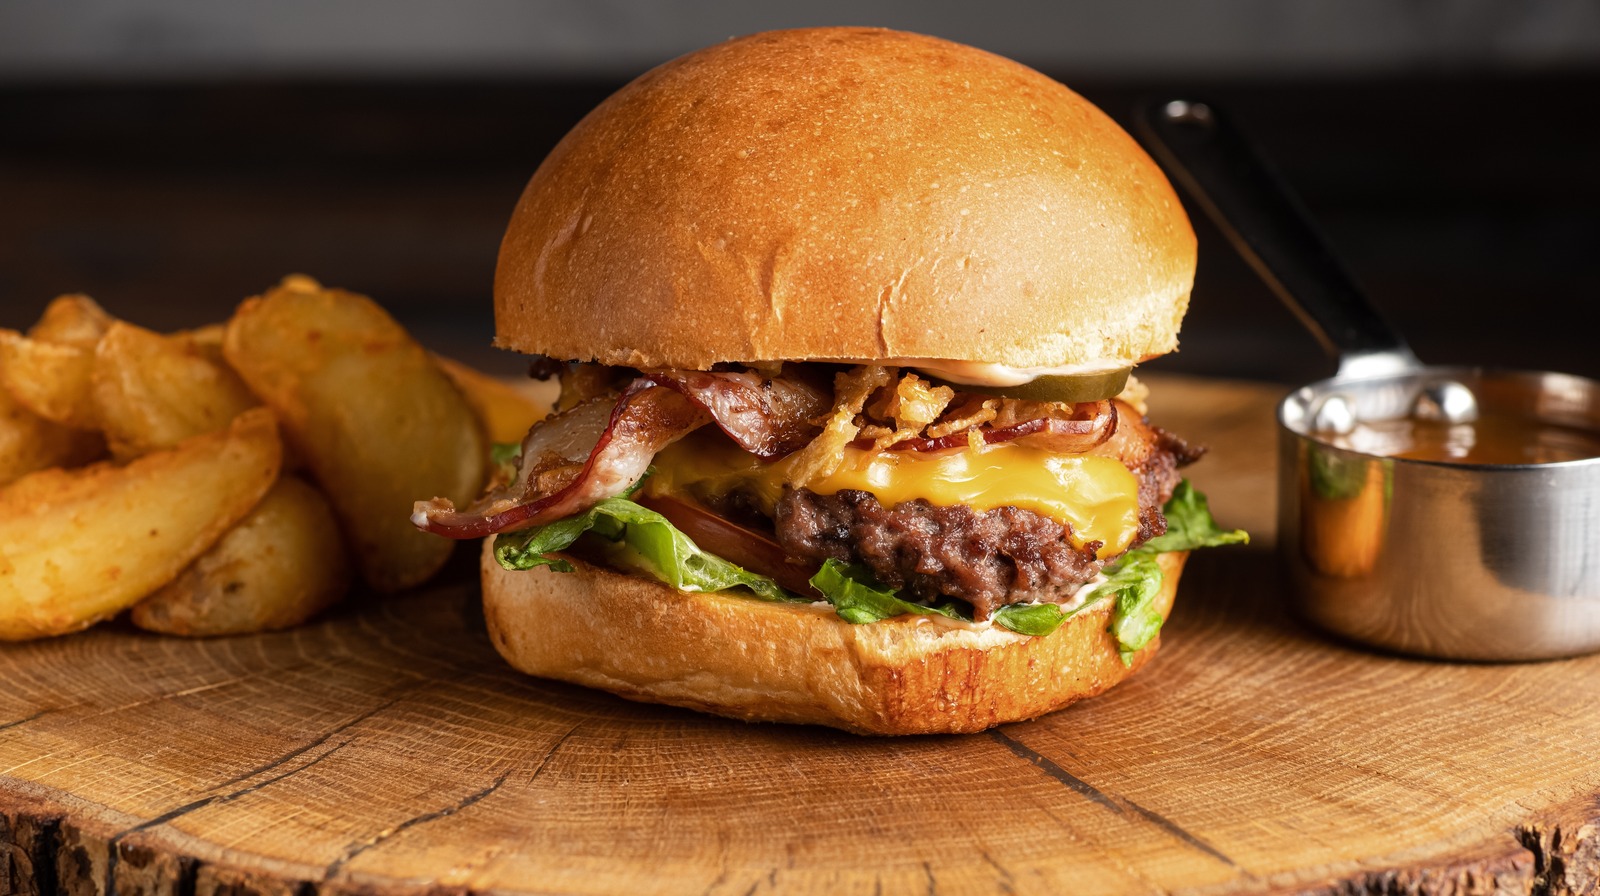 One of the tastiest ways to do burgers requires getting a little